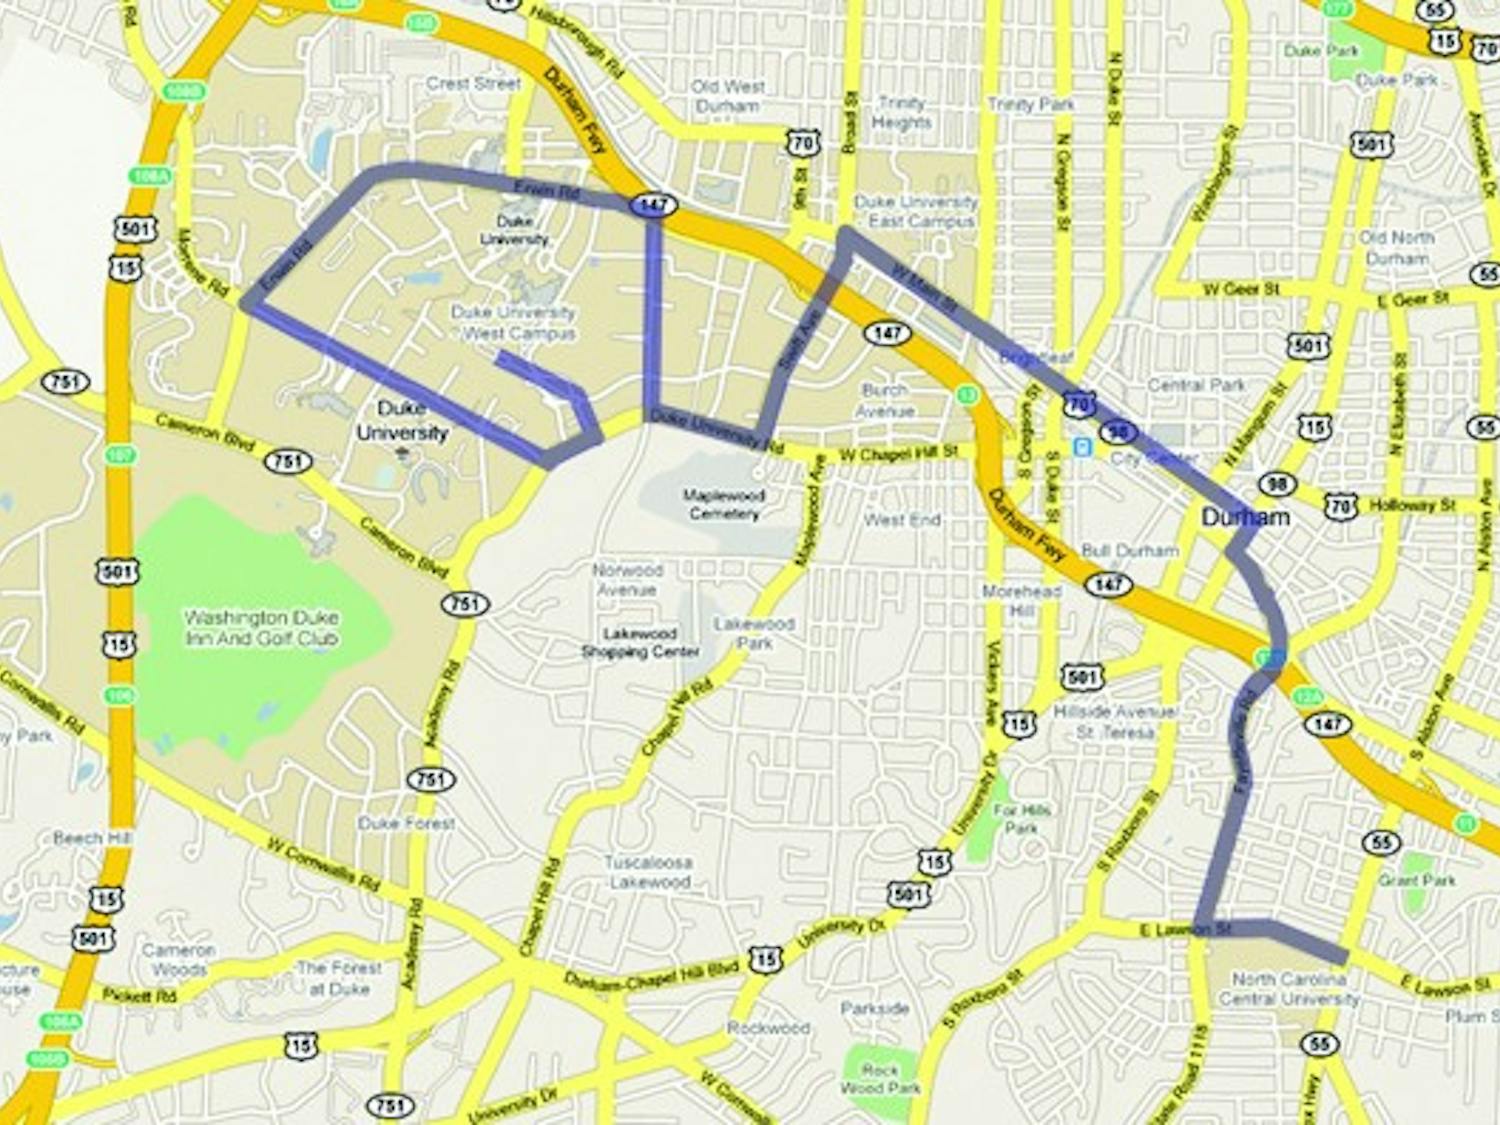 A possible route for the Duke-Durham Connector is shown above. The proposed bus route will connect Duke to downtown Durham and NCCU.